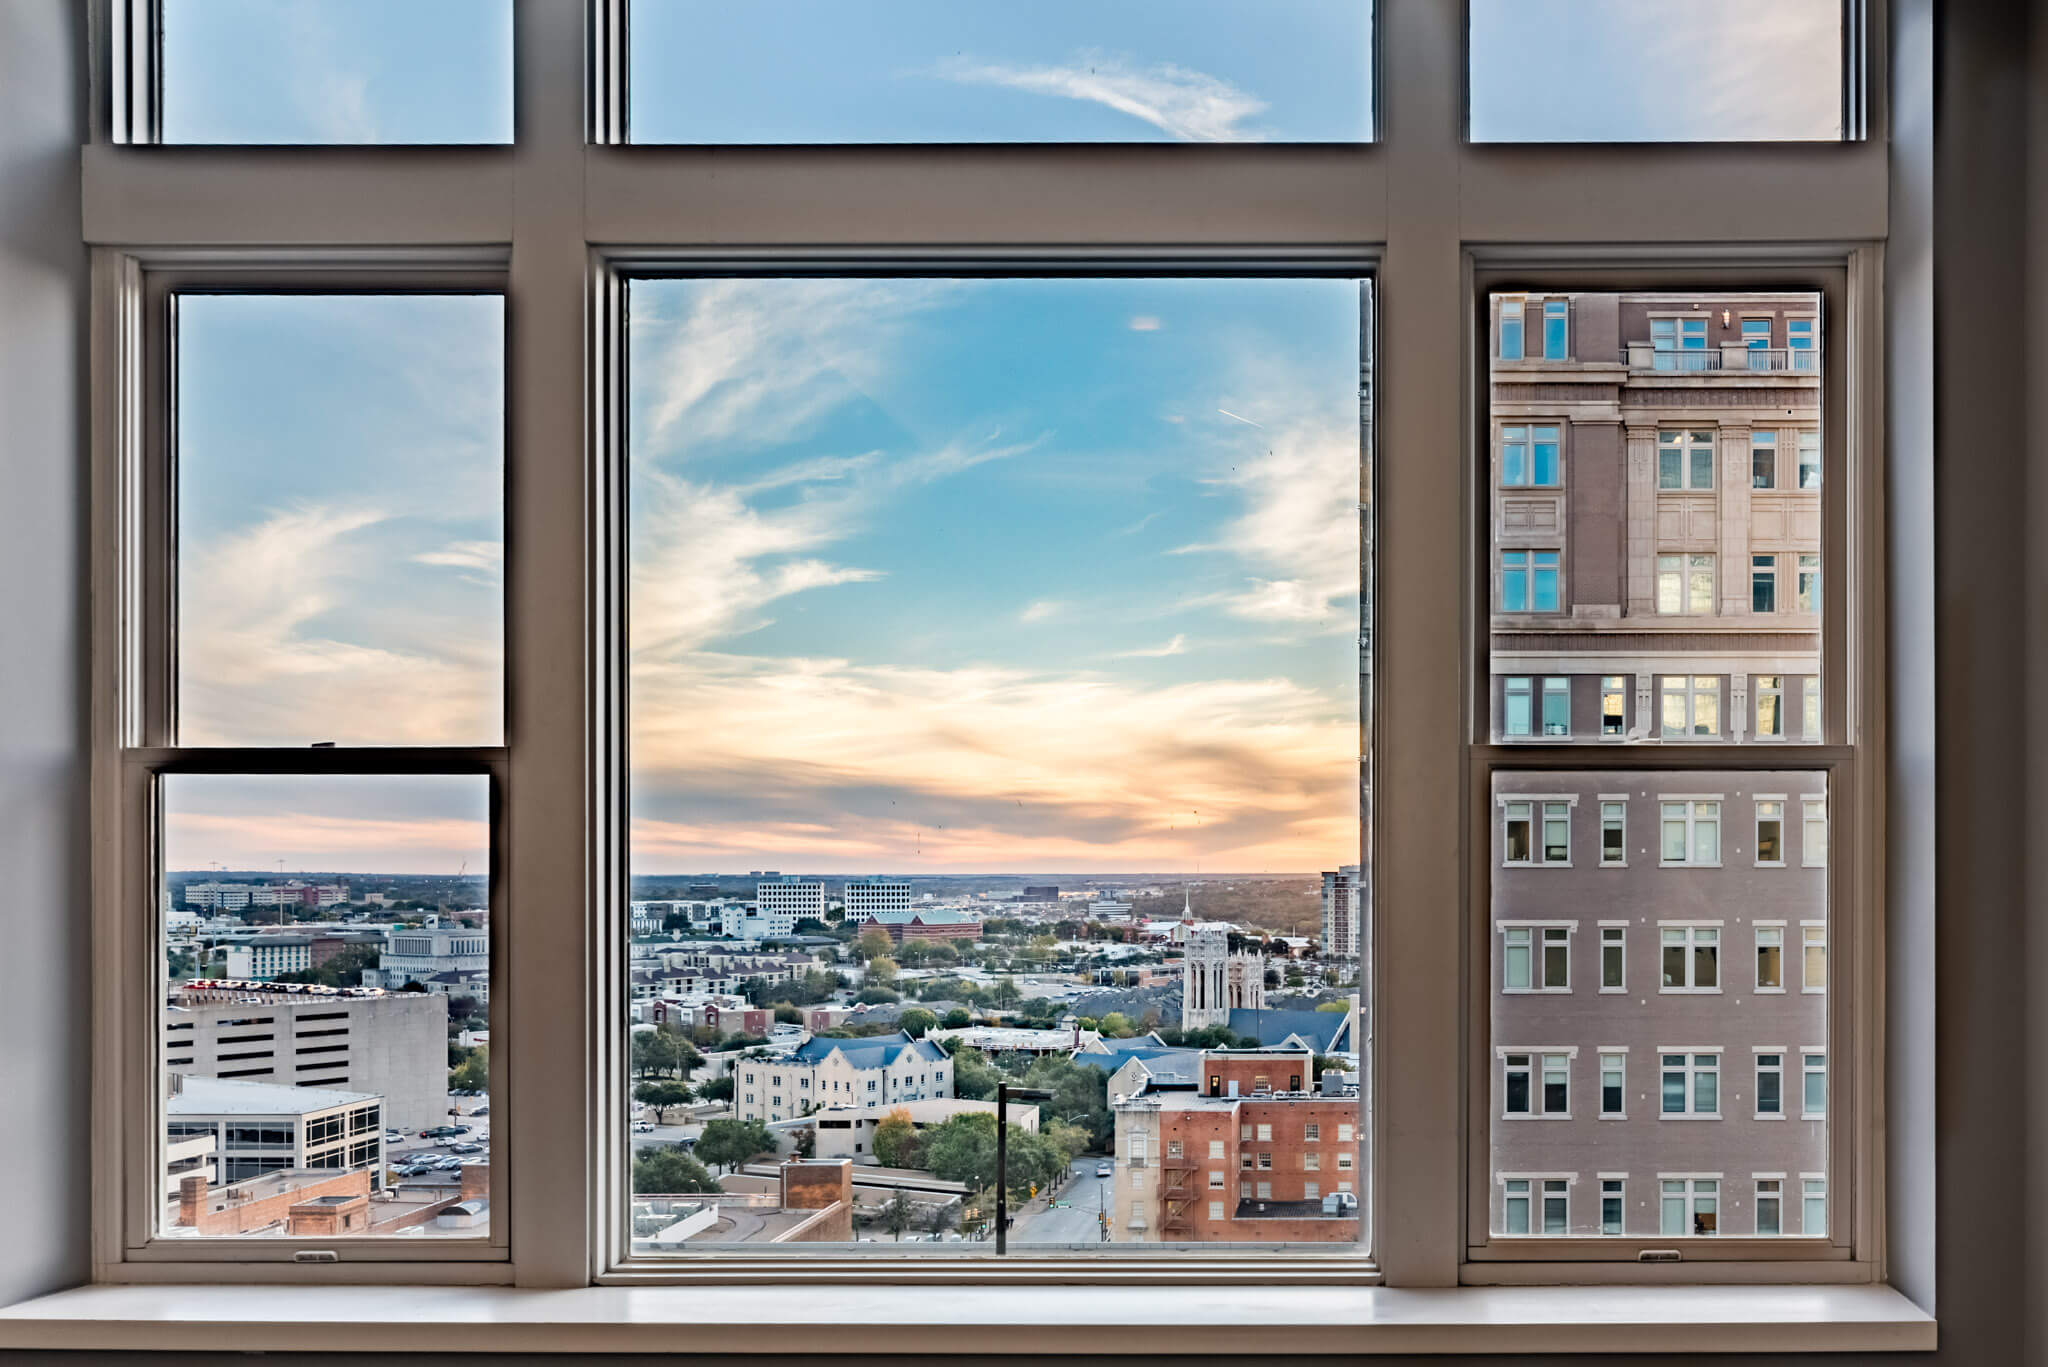 A window with a view of the city.